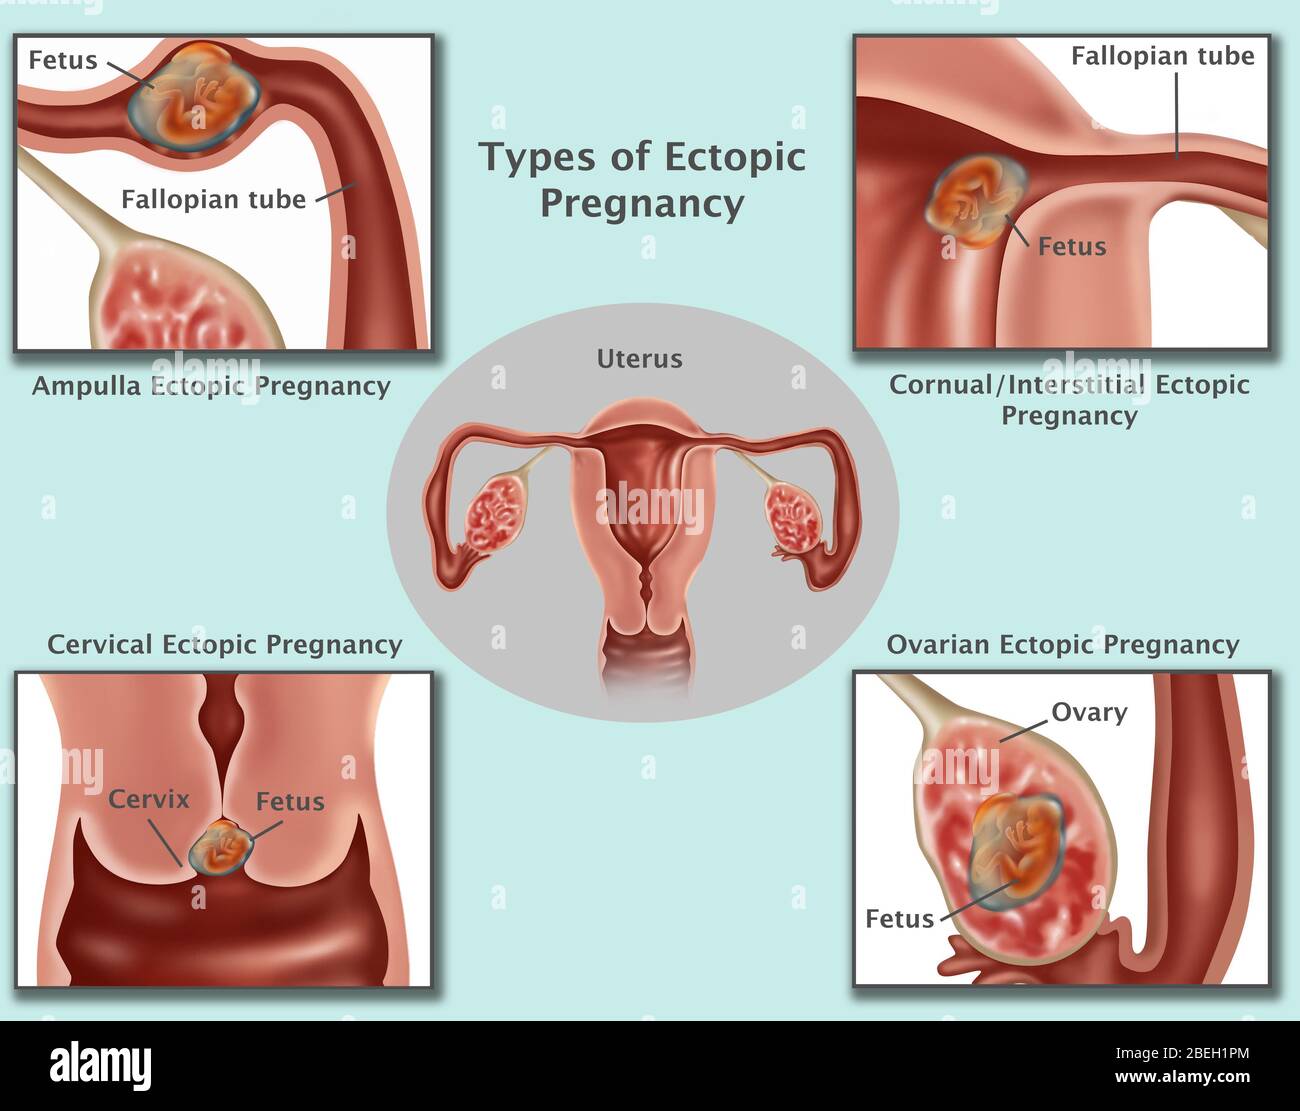 Illustration of common ectopic pregnancies. Pregnancies occurring in the Ampulla (top left), Interstitial Fallopian Tube (top right), cervix (bottom left), and the ovary (bottom right). As the ectopic pregnancy develops, the growing embryo may rupture the surrounding tissues causing serious bleeding. Surgery is usually performed to remove the embryo, and to repair or remove the area of implantation. Stock Photo